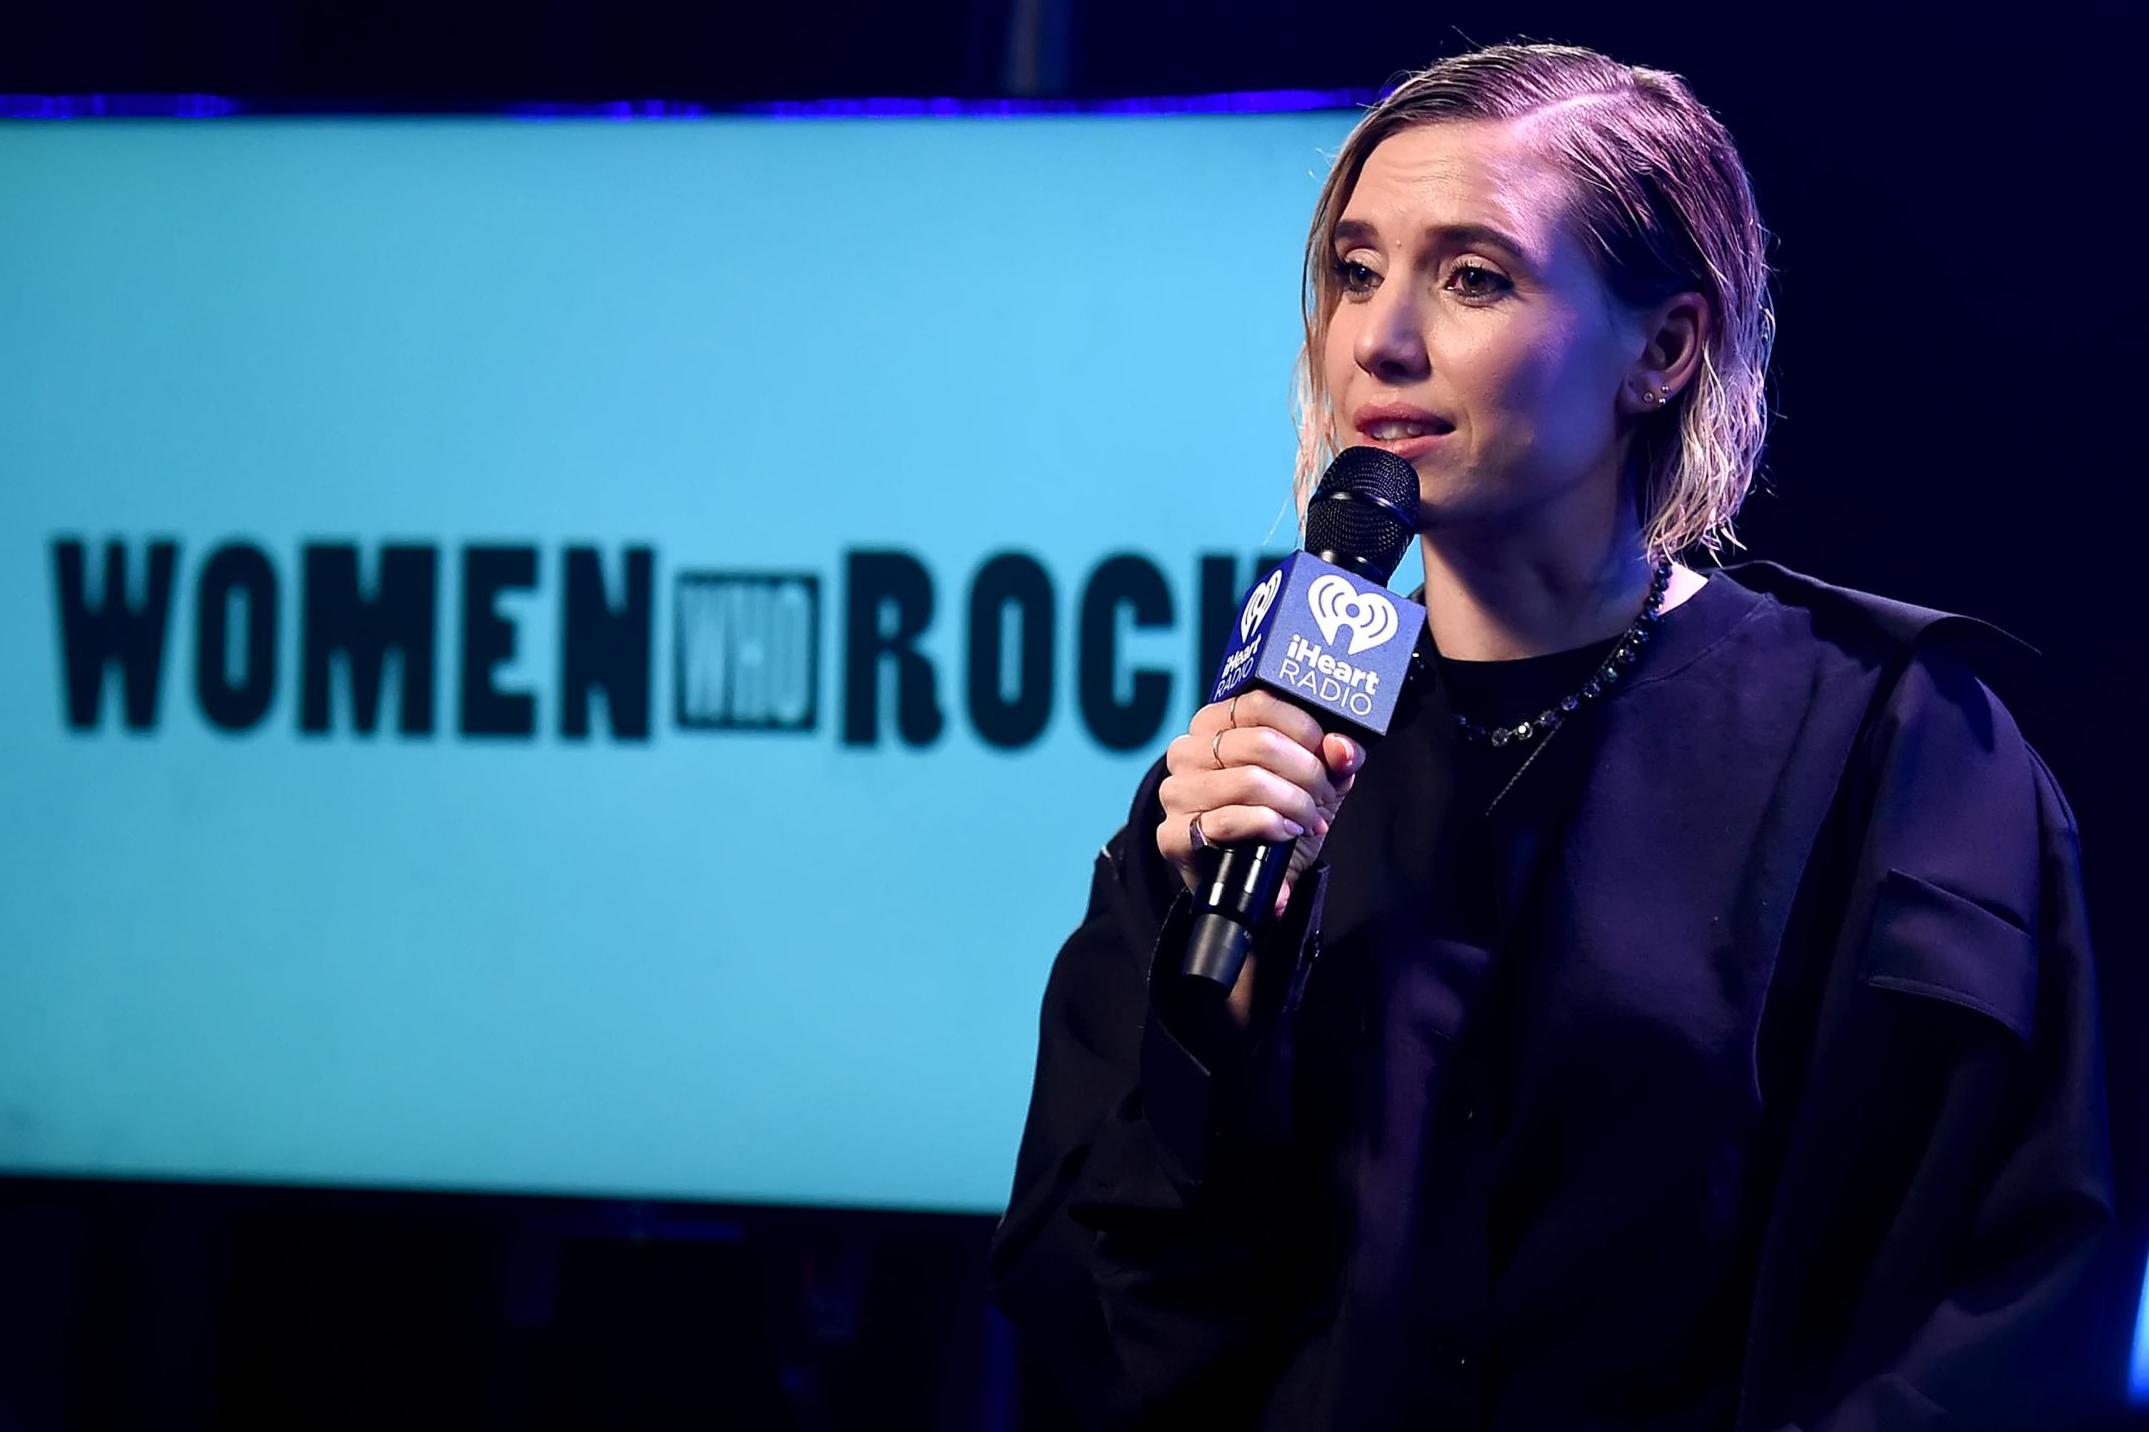 Yola Fest: Lykke Li launches all-female festival featuring Courtney Love, Cat Power and Charli XCX 